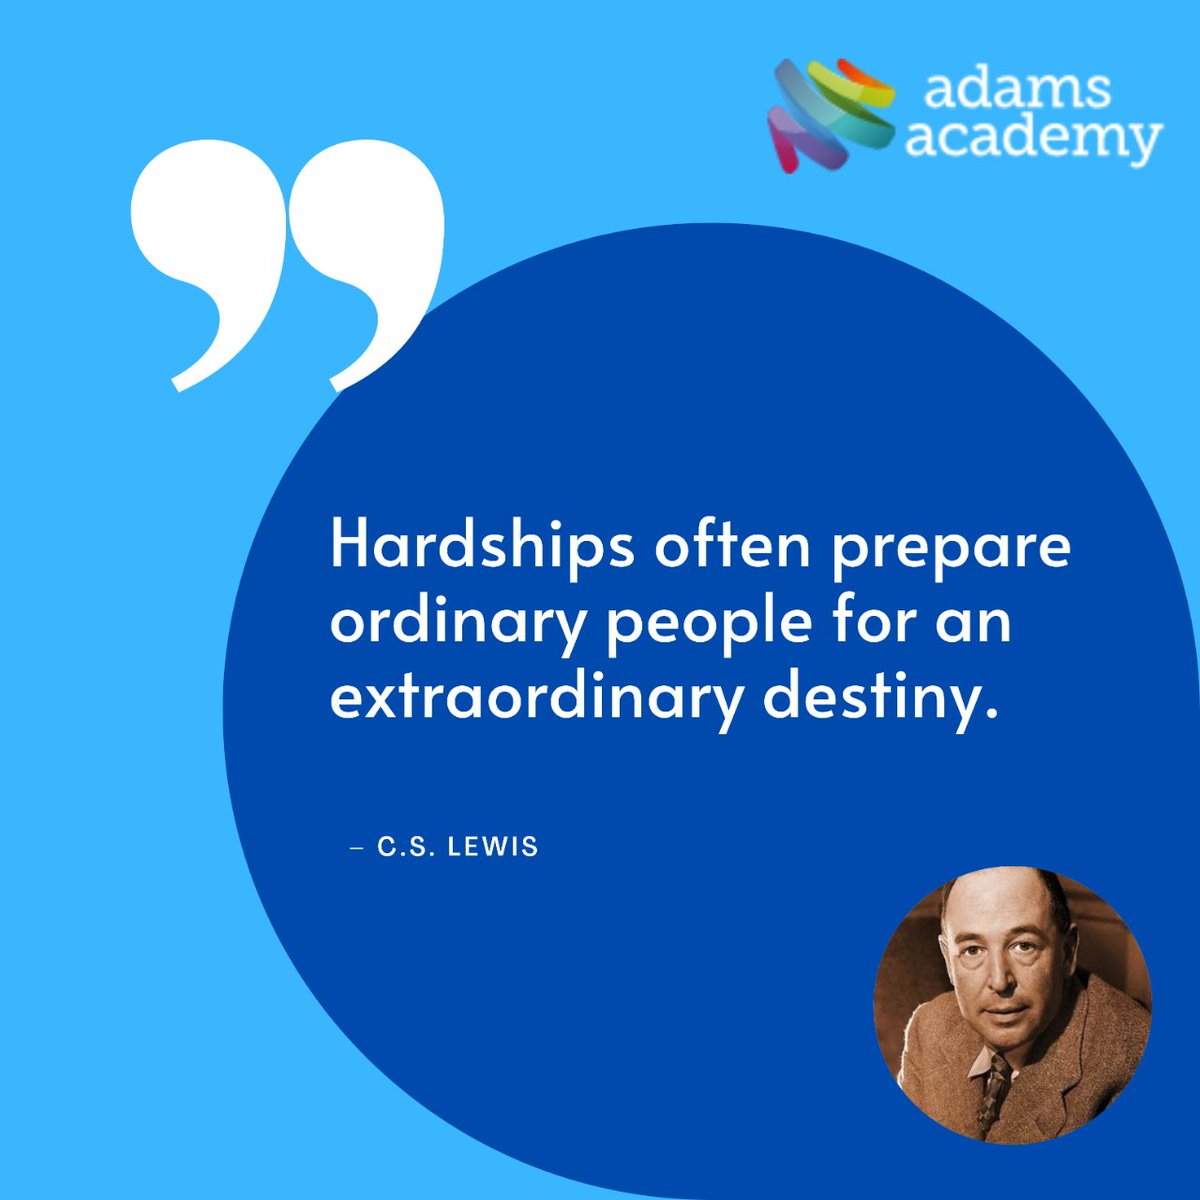 Embrace your challenges; they are shaping you for something amazing ahead.
#CSLewis #ExtraordinaryDestiny #OvercomeChallenges #AdamsAcademy